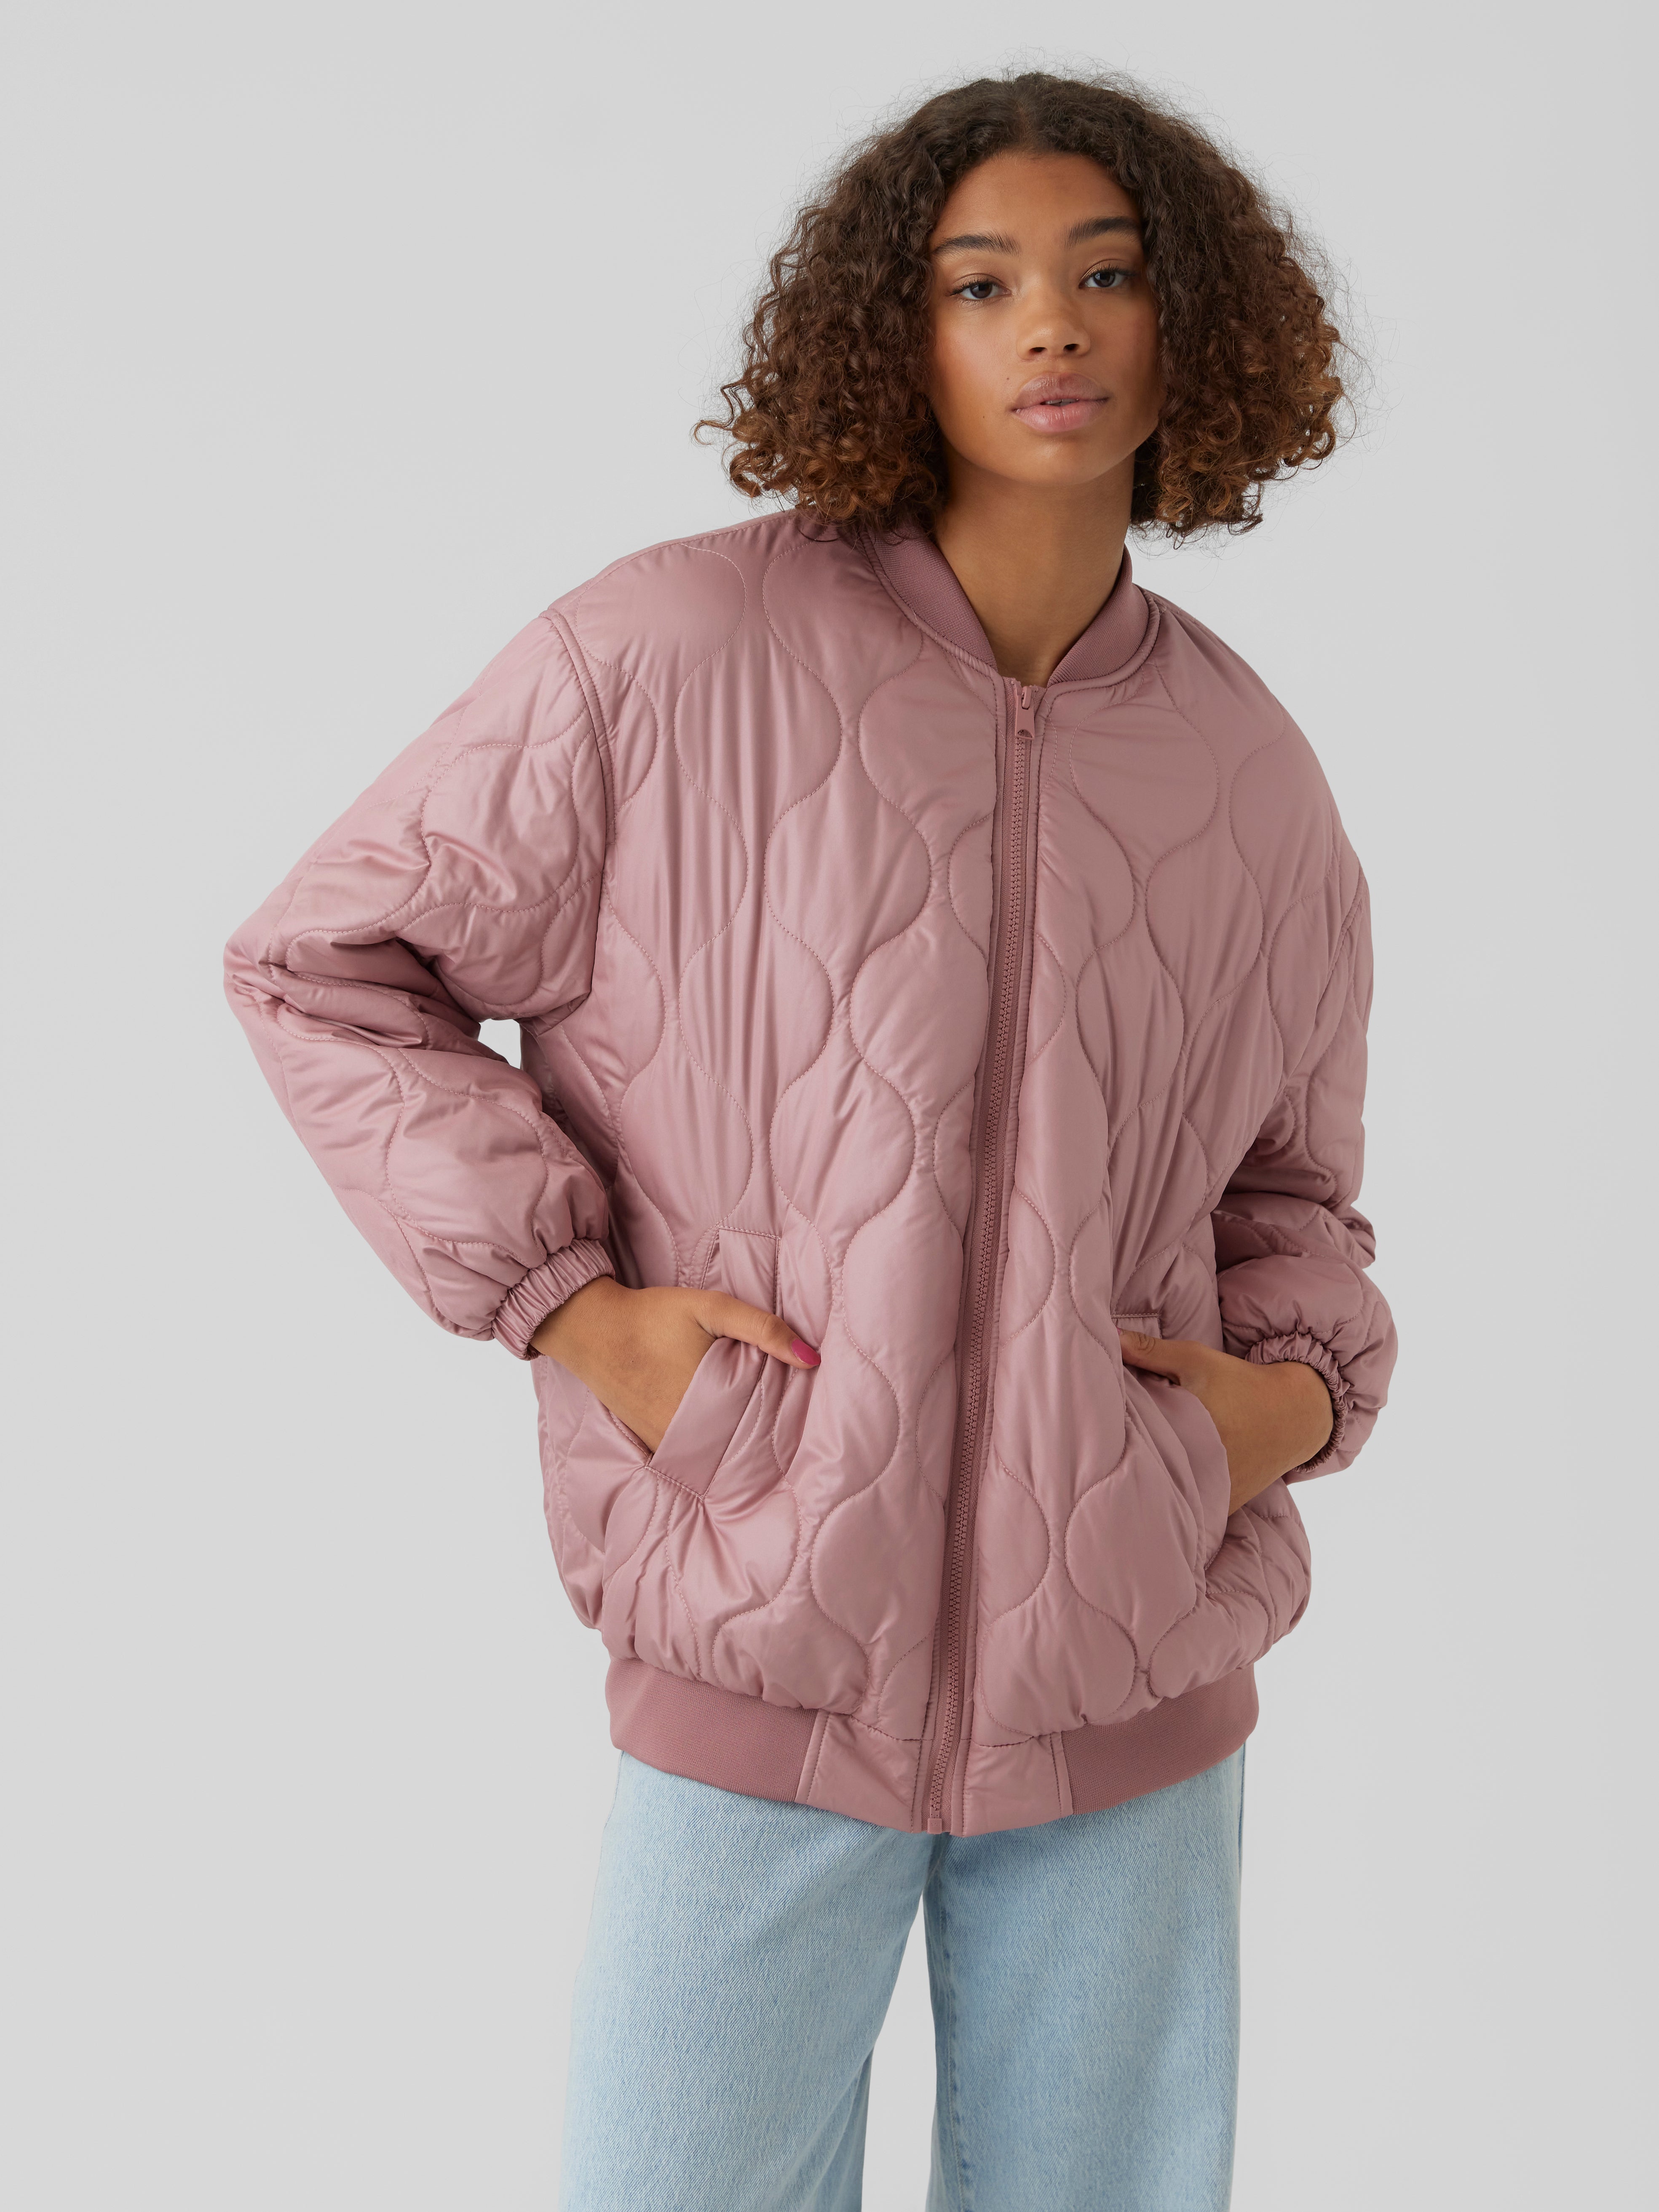 Buy Women's Olive Relaxed Fit Puffer Jacket Online at Bewakoof